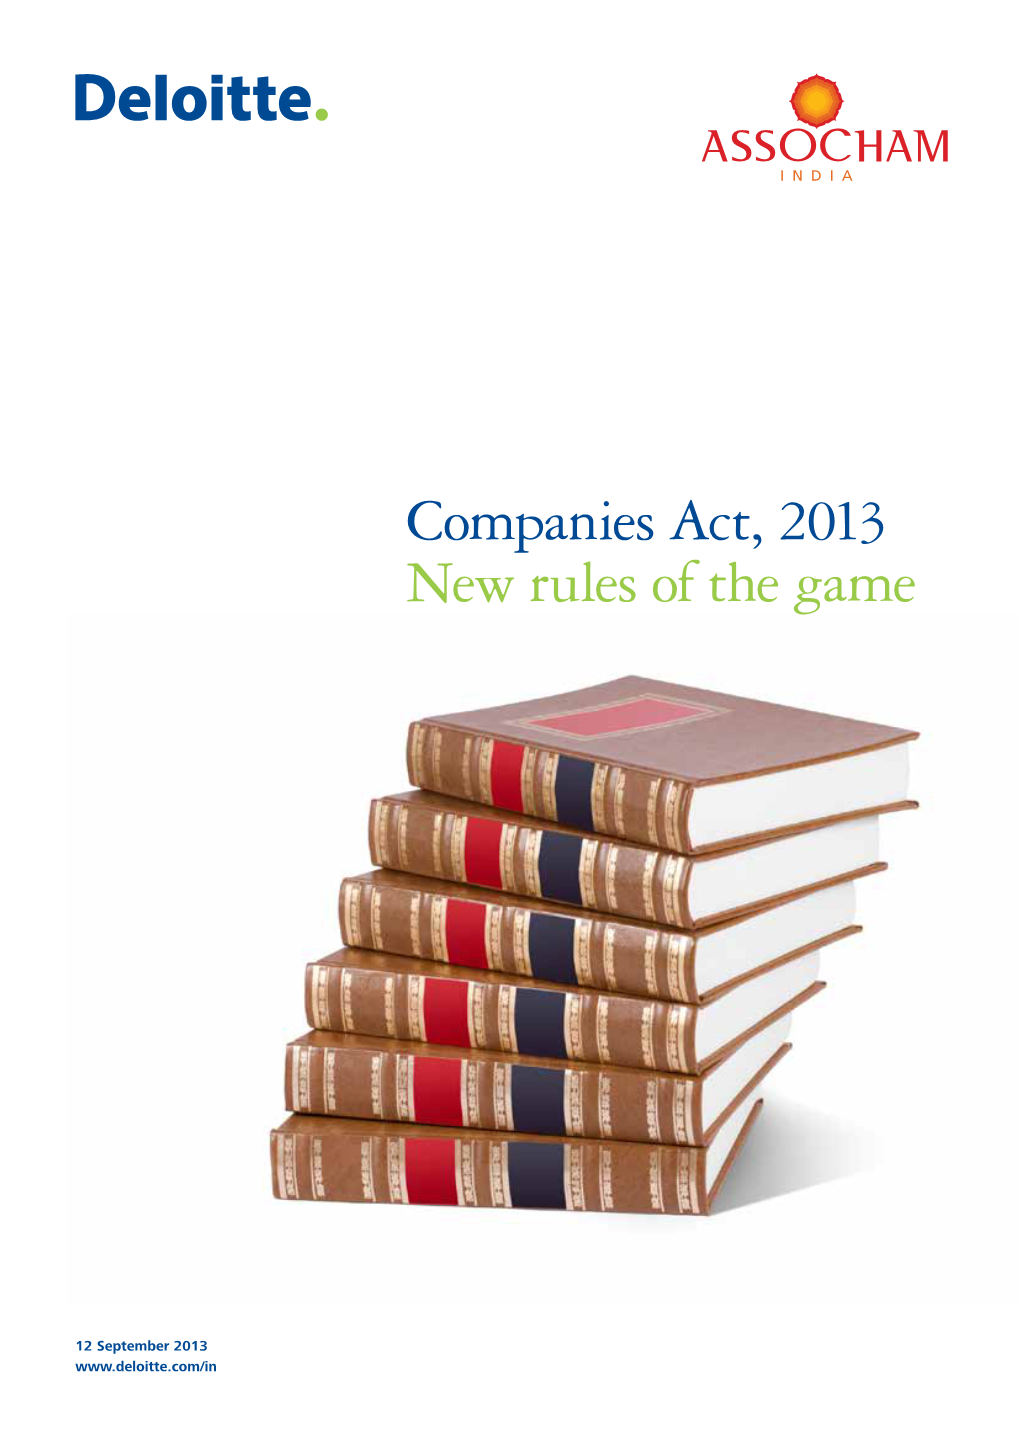 Companies Act, 2013 New Rules of the Game